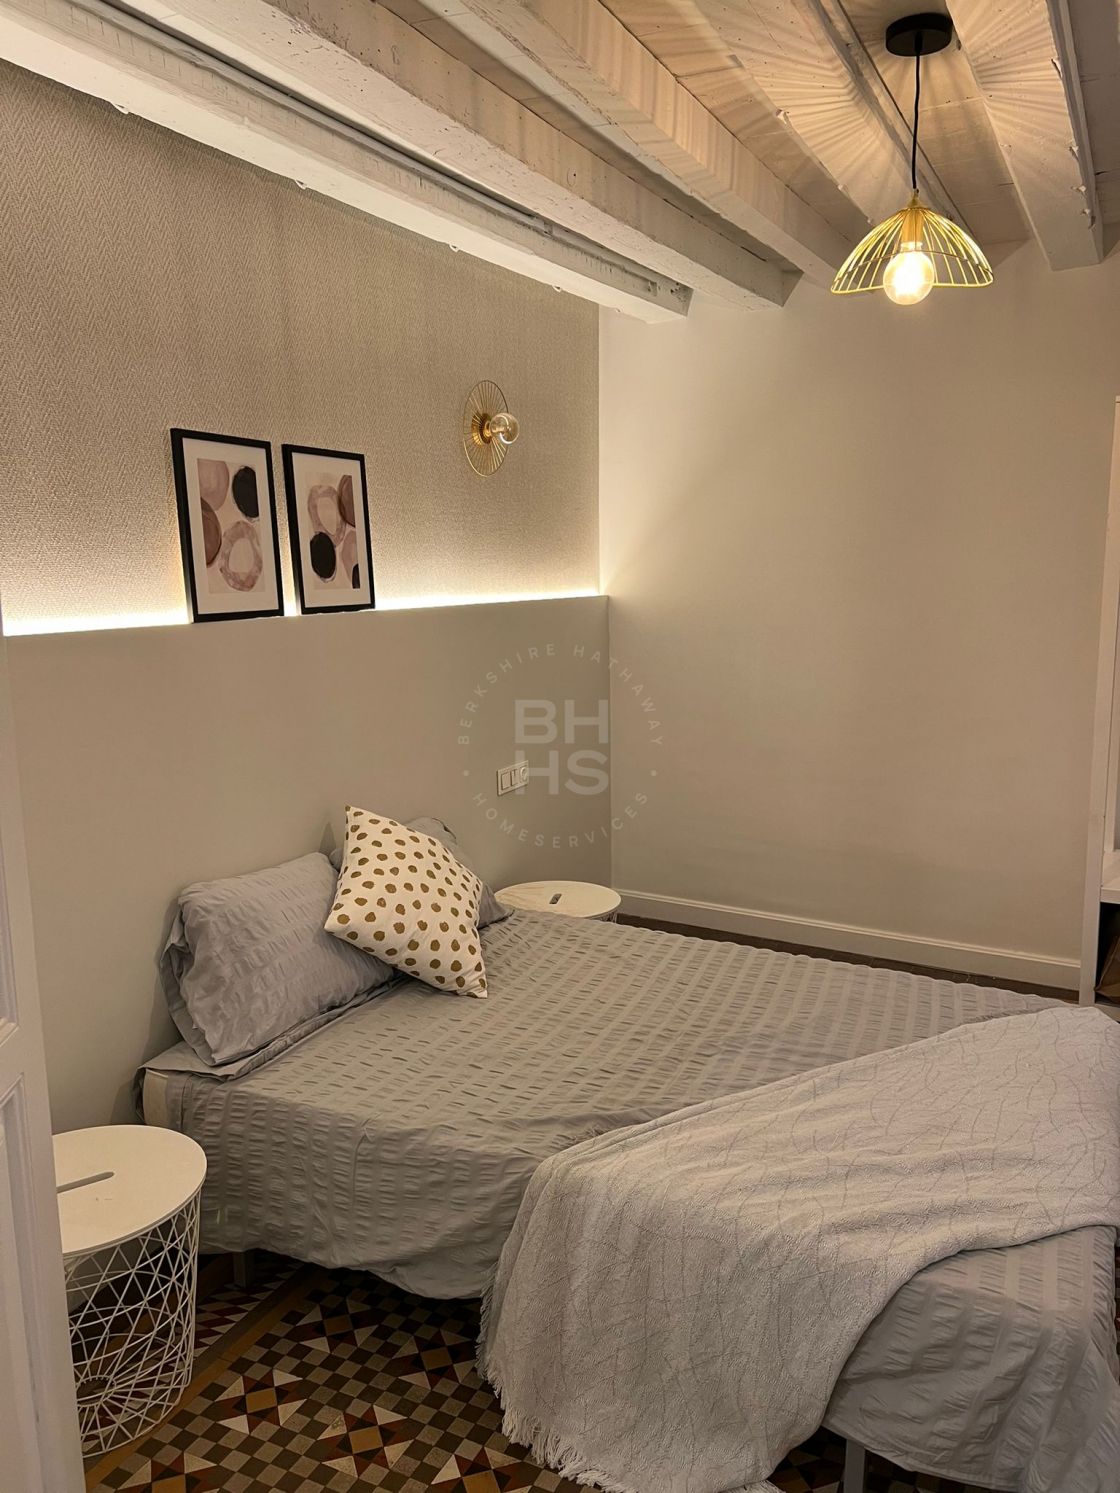 Recently renovated elegant apartment in the historic centre of Malaga